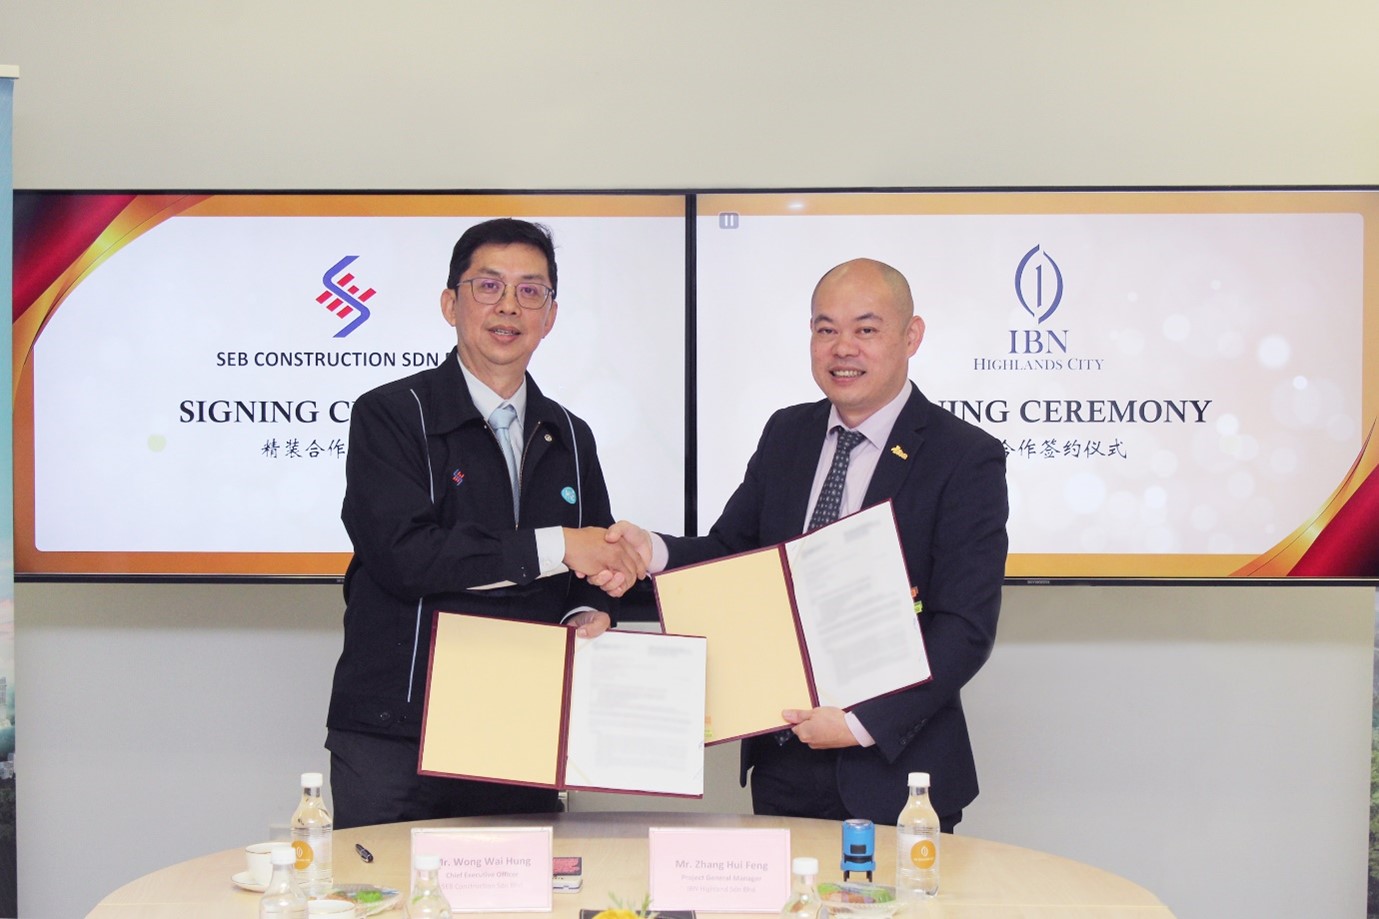 (From the left) SEB Construction Sdn Bhd Director Wong Wai Hung, IBN Highlands City Project General Manager Zhang Huifeng. The renovation works for IBN Highlands City officially commence with a successful Letter of Award signing ceremony.